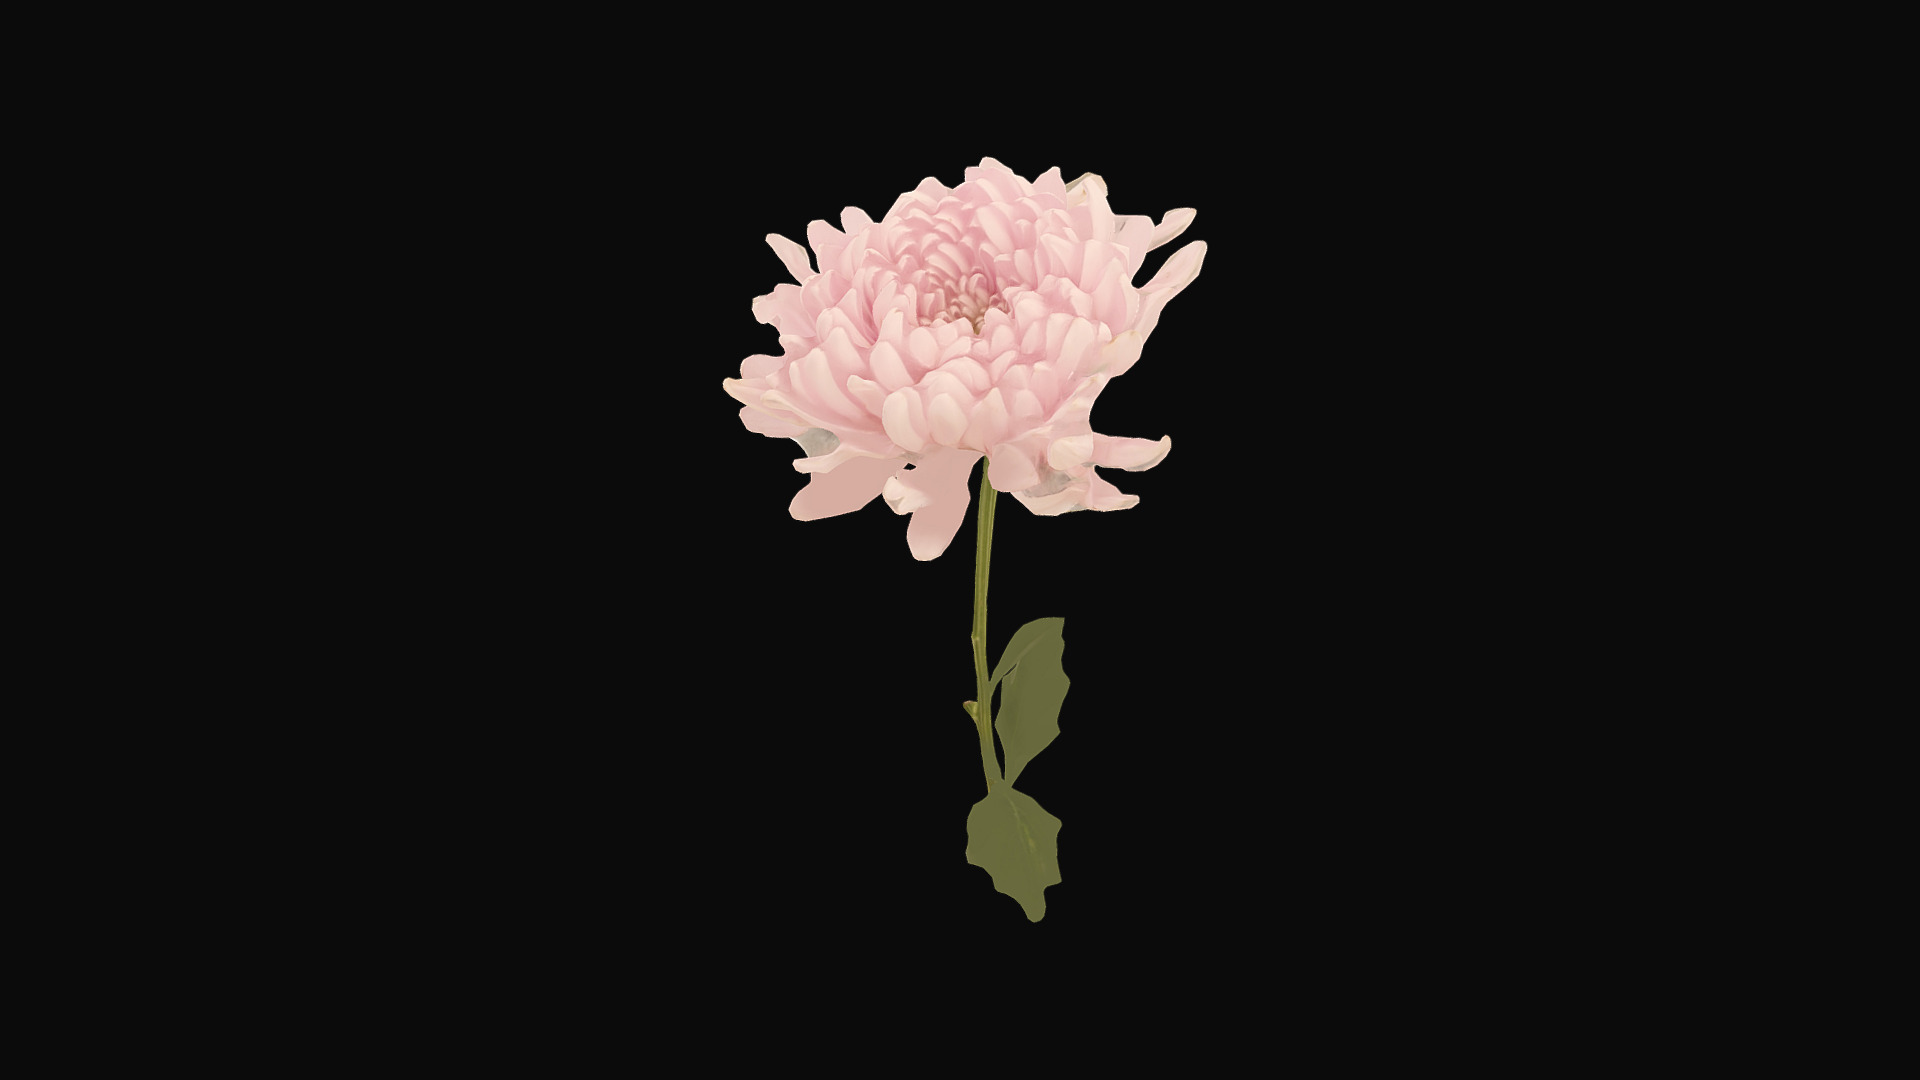 3D model Fw29 – Light Pink Flower - This is a 3D model of the Fw29 - Light Pink Flower. The 3D model is about a pink flower with green leaves.